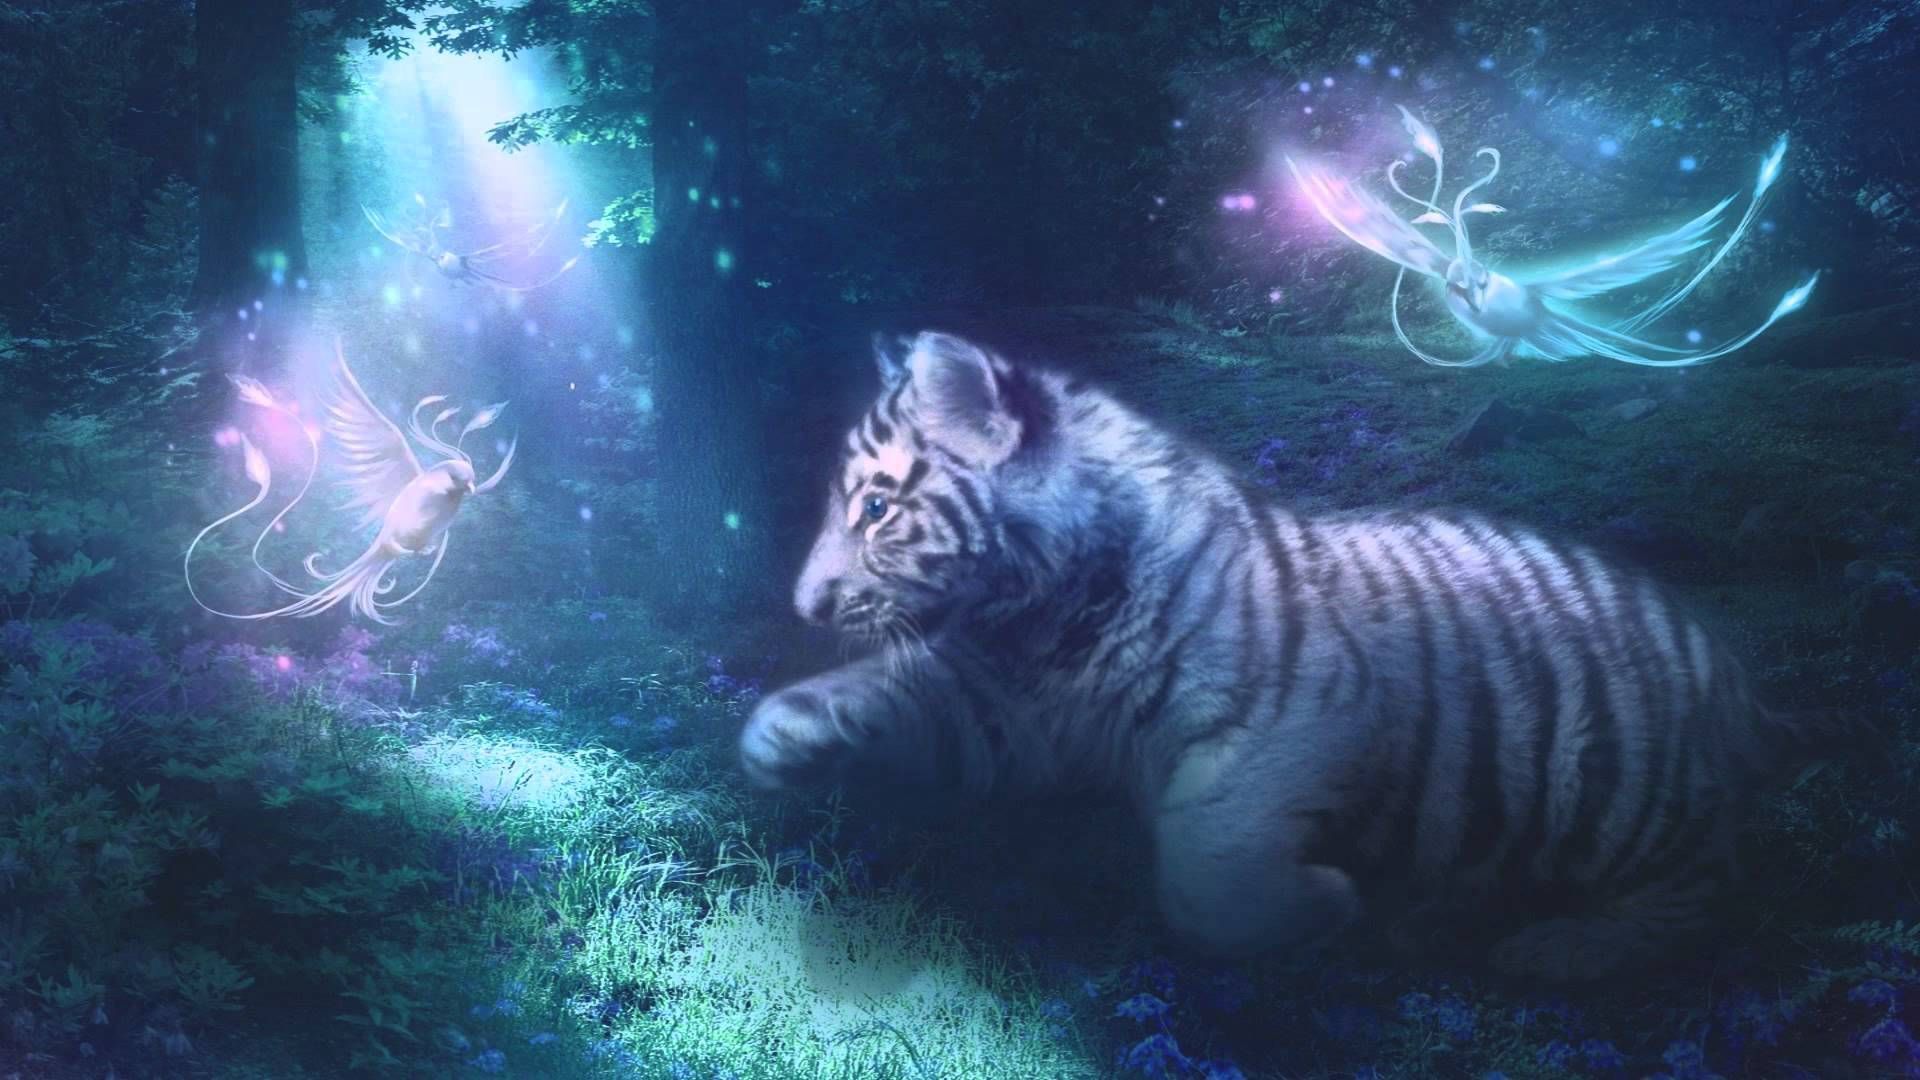 Lion's Heart Production Epic Magical Orchestral Beautiful Choi. Animal spirit guides, Tiger art, Tiger wallpaper